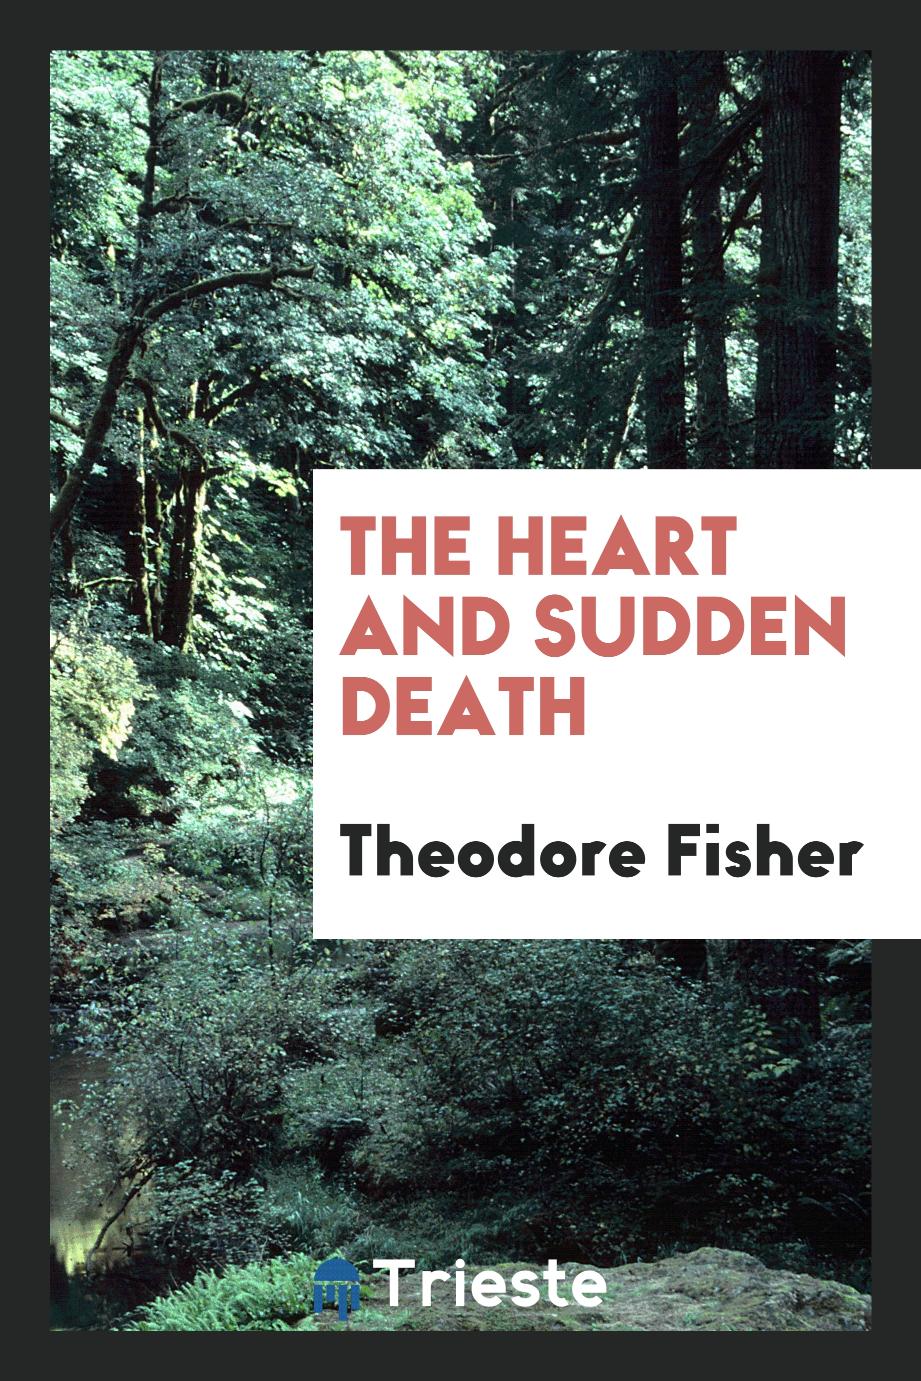 The Heart and Sudden Death